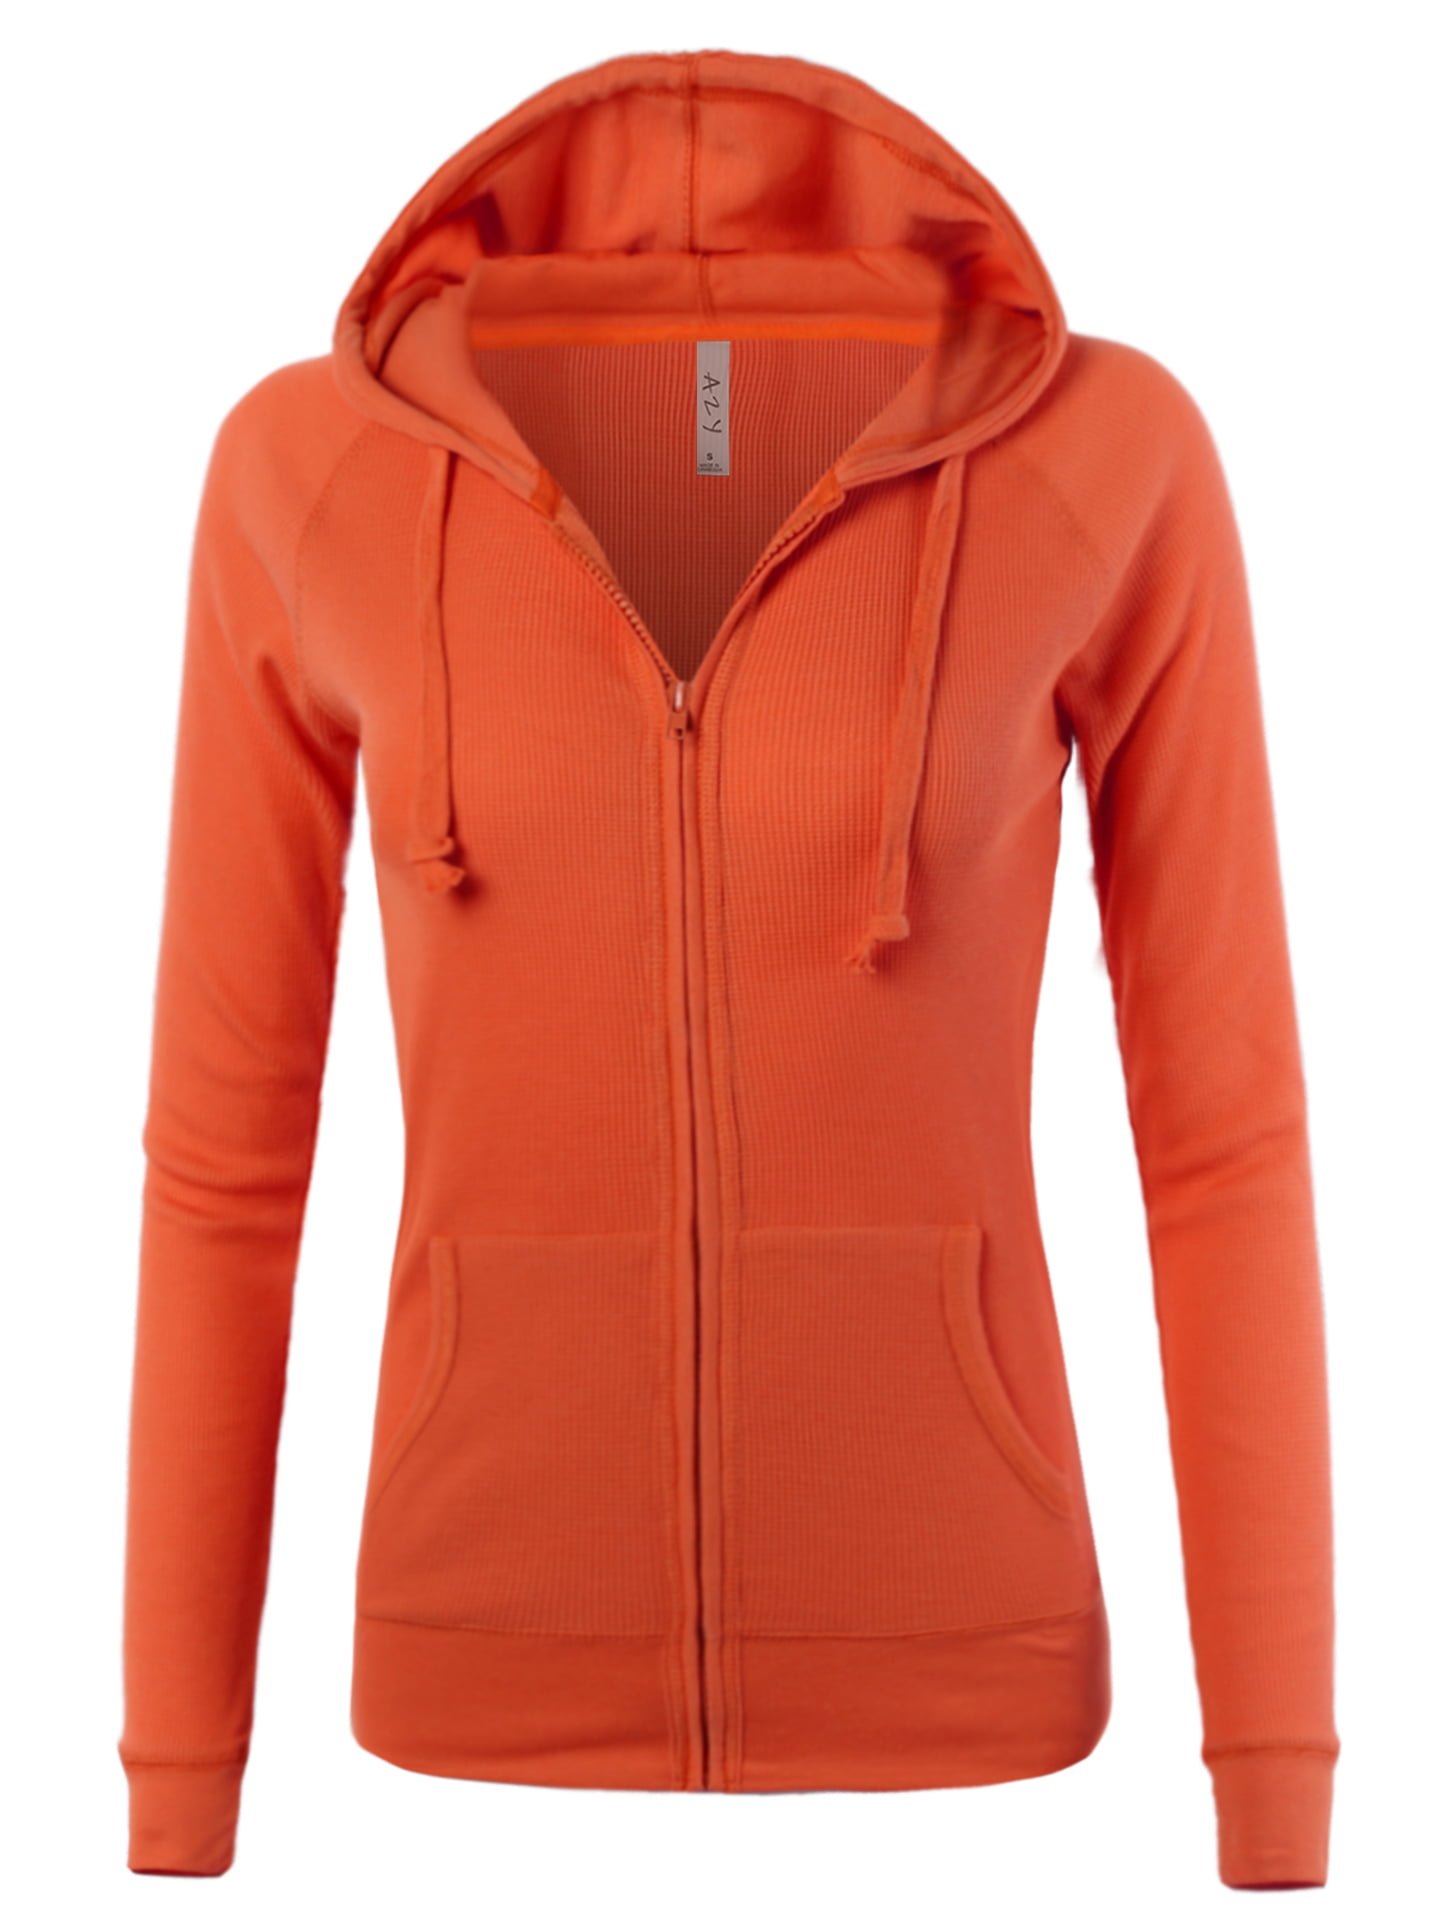 A2Y - A2Y Women's Casual Fitted Lightweight Pocket Zip Up Hoodie Orange ...